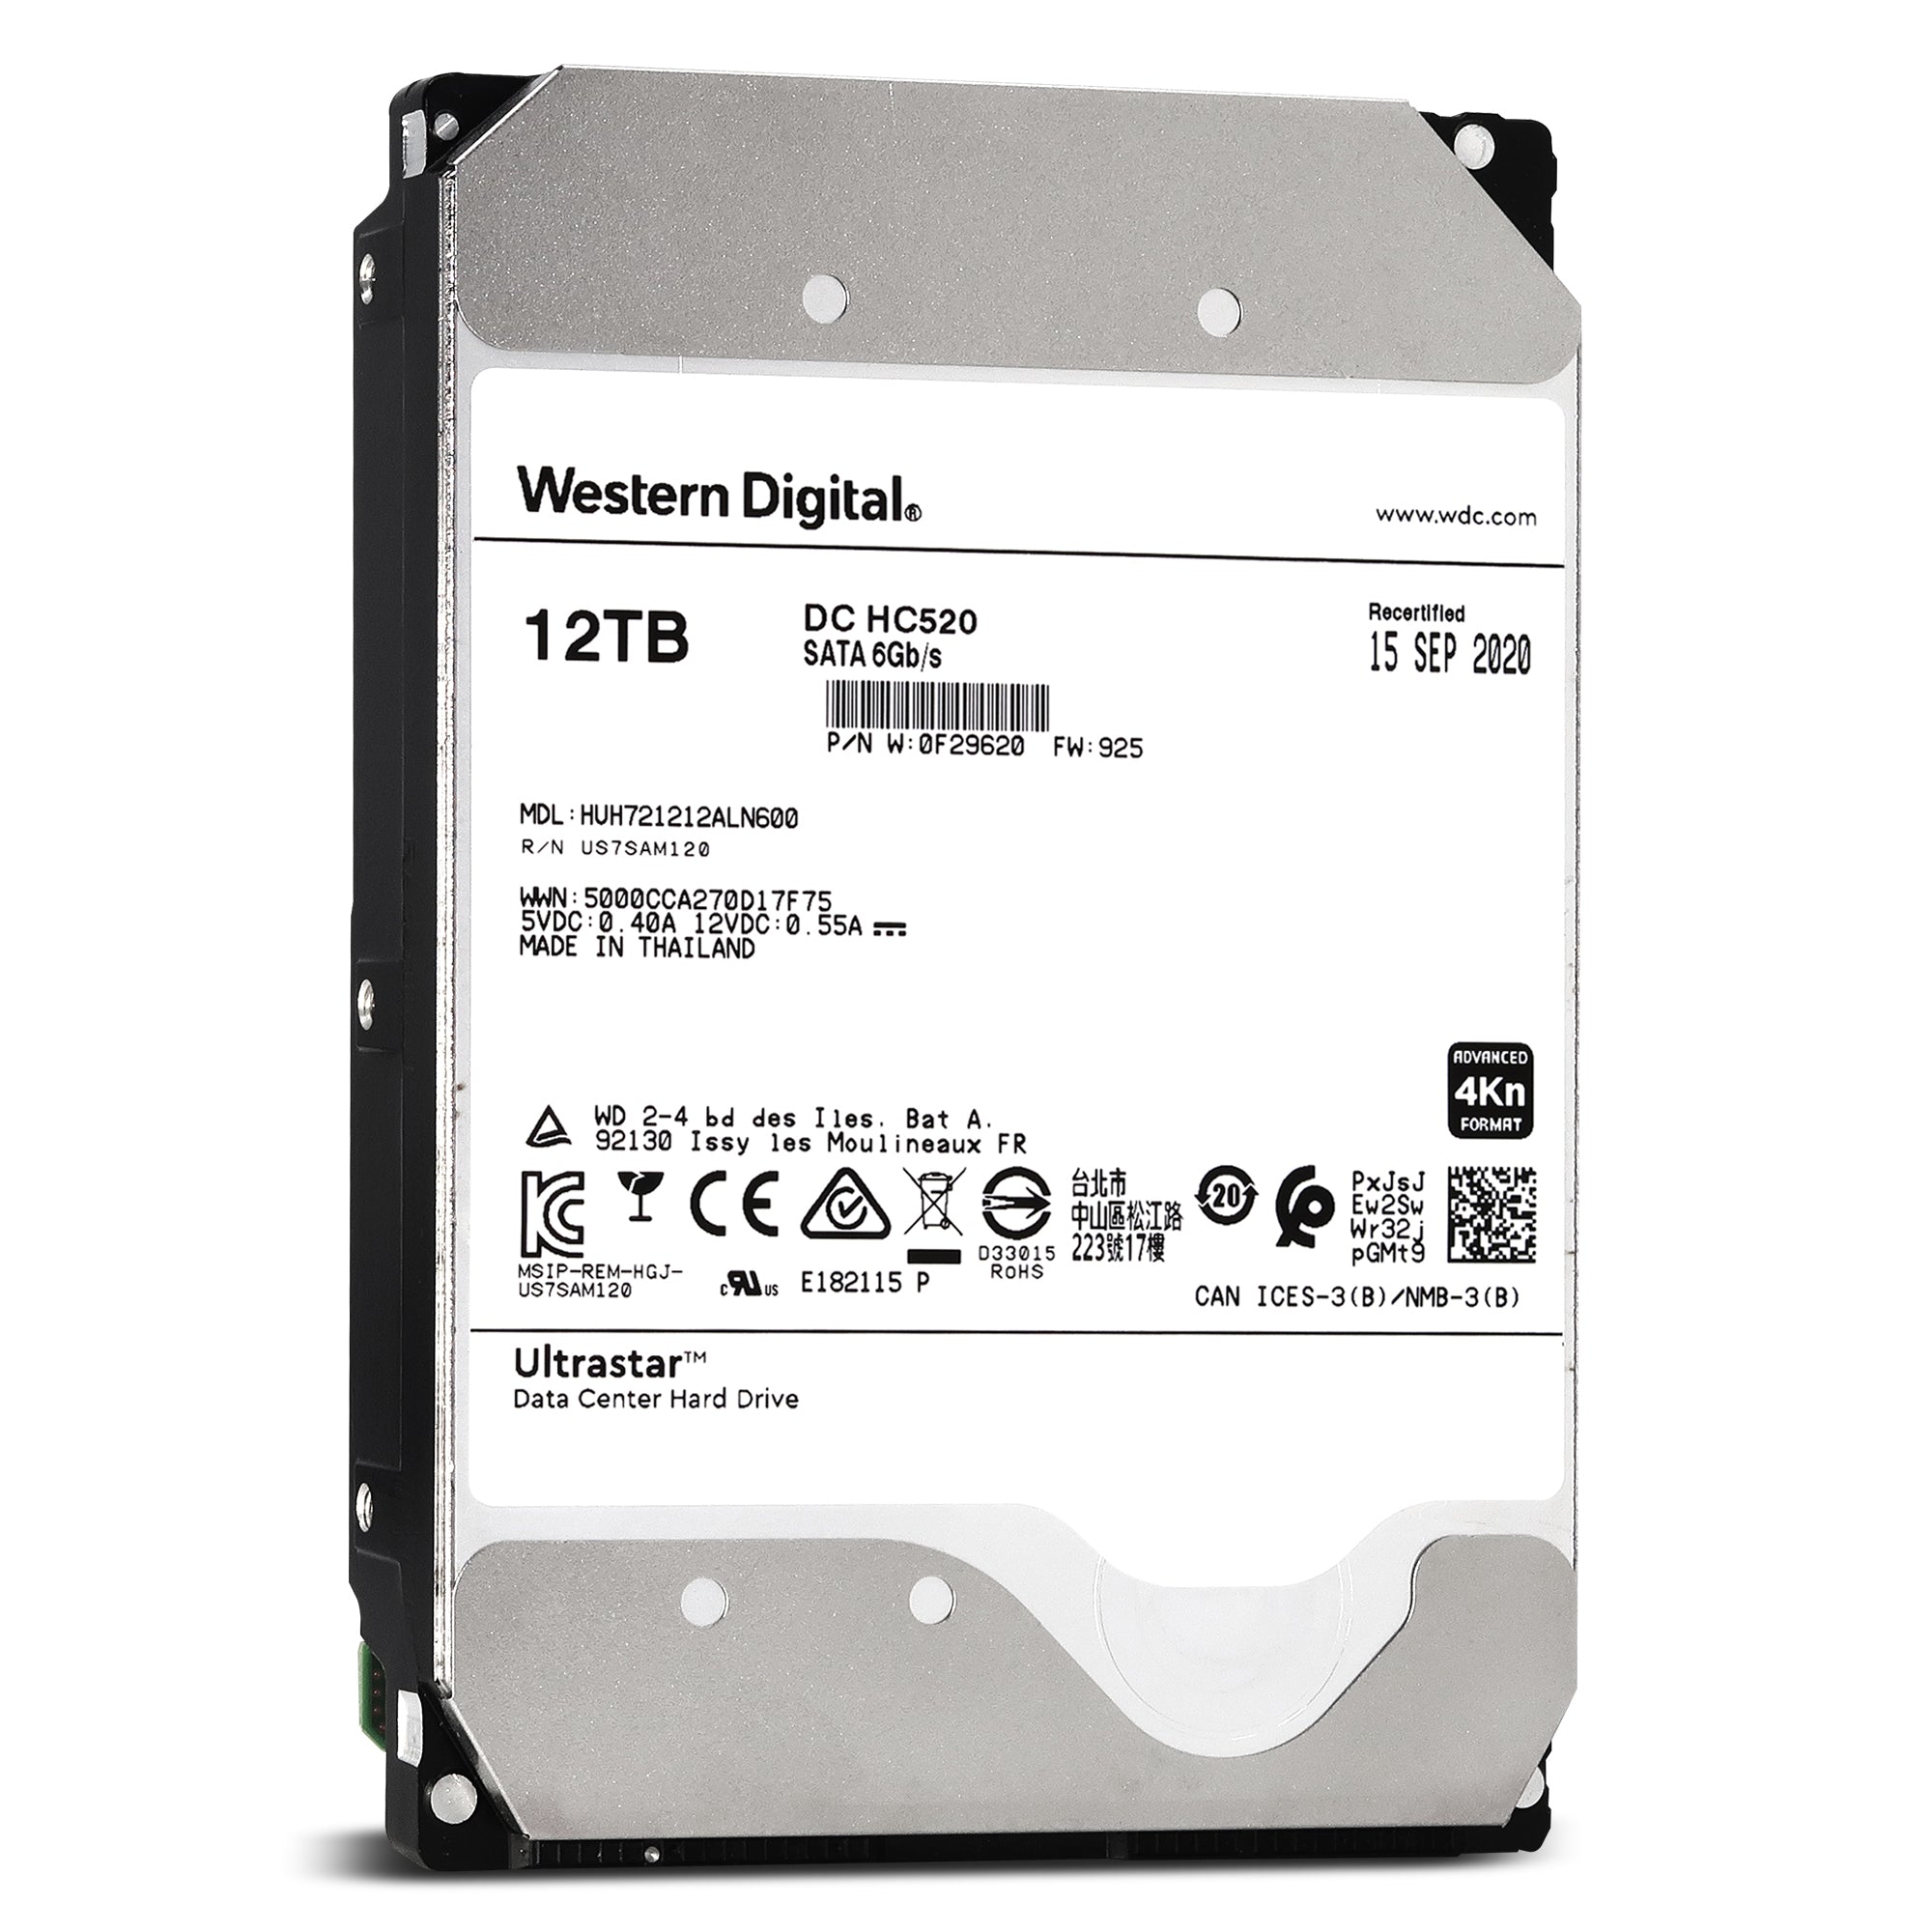 WD Ultrastar HC520 HUH721212ALN600 0F29620 12TB 7.2K RPM SATA 6Gb/s 4Kn 256MB 3.5" ISE Power Disable Pin Manufacturer Recertified HDD - Front View